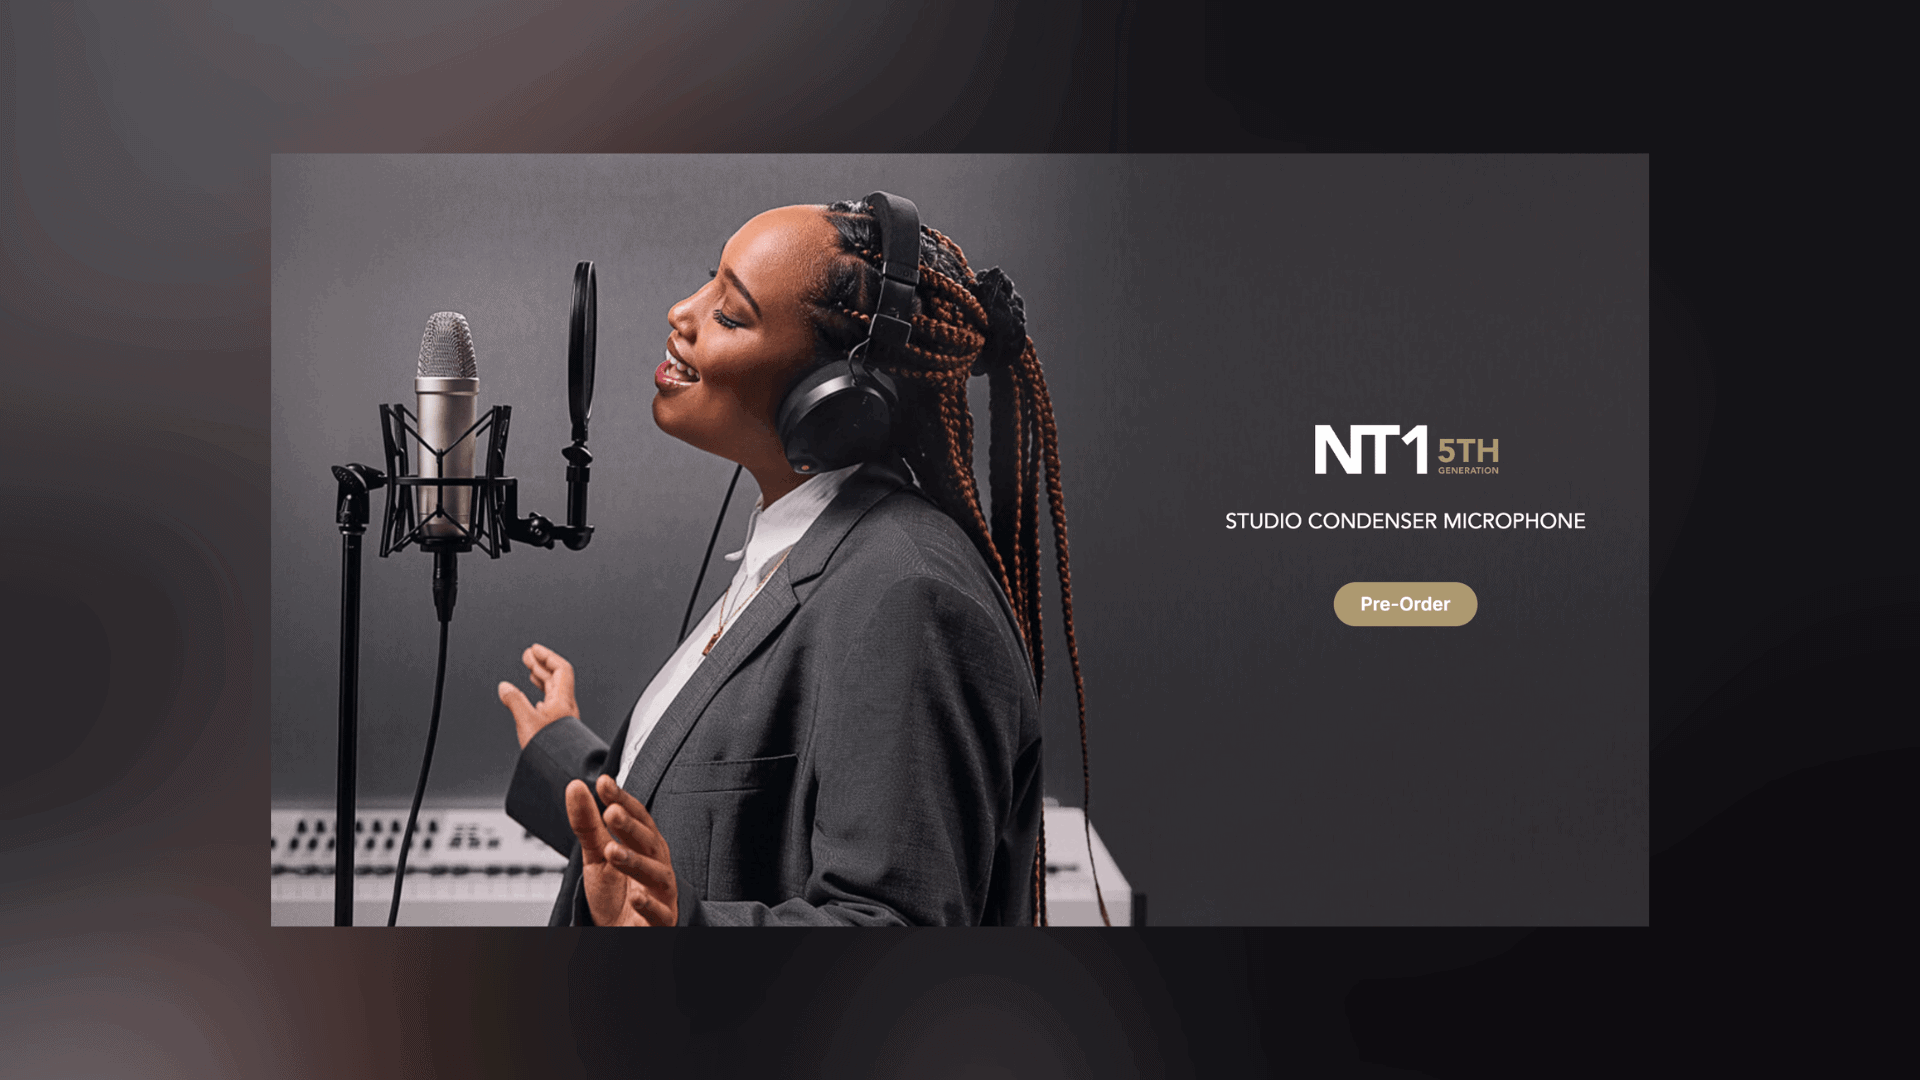 The new RØDE NT1 5th generation microphone is set to release